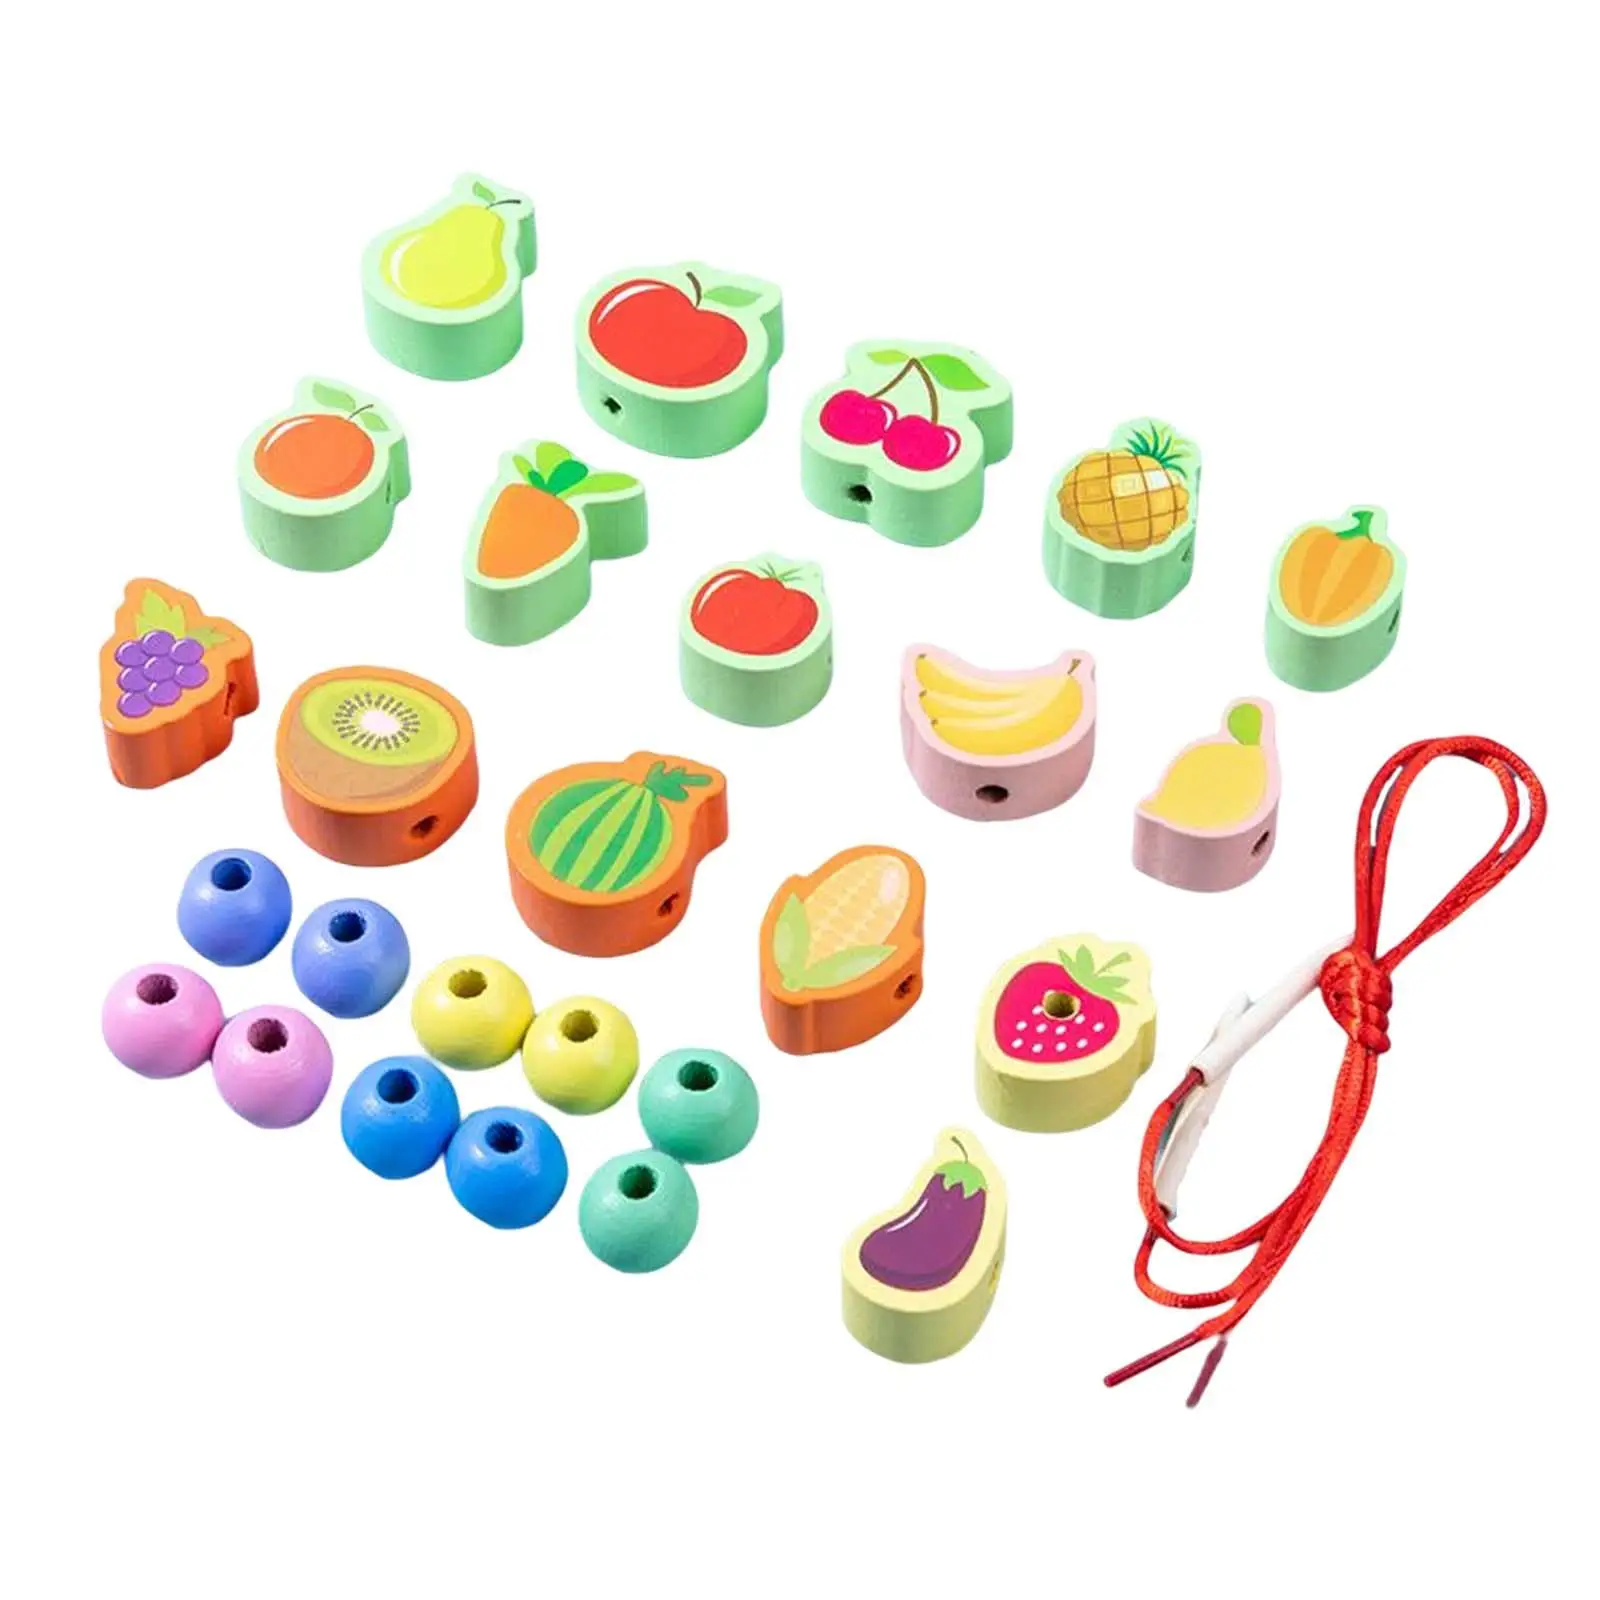 Threading Toys Developmental Toy Lacing Beads Set for Educational Gifts